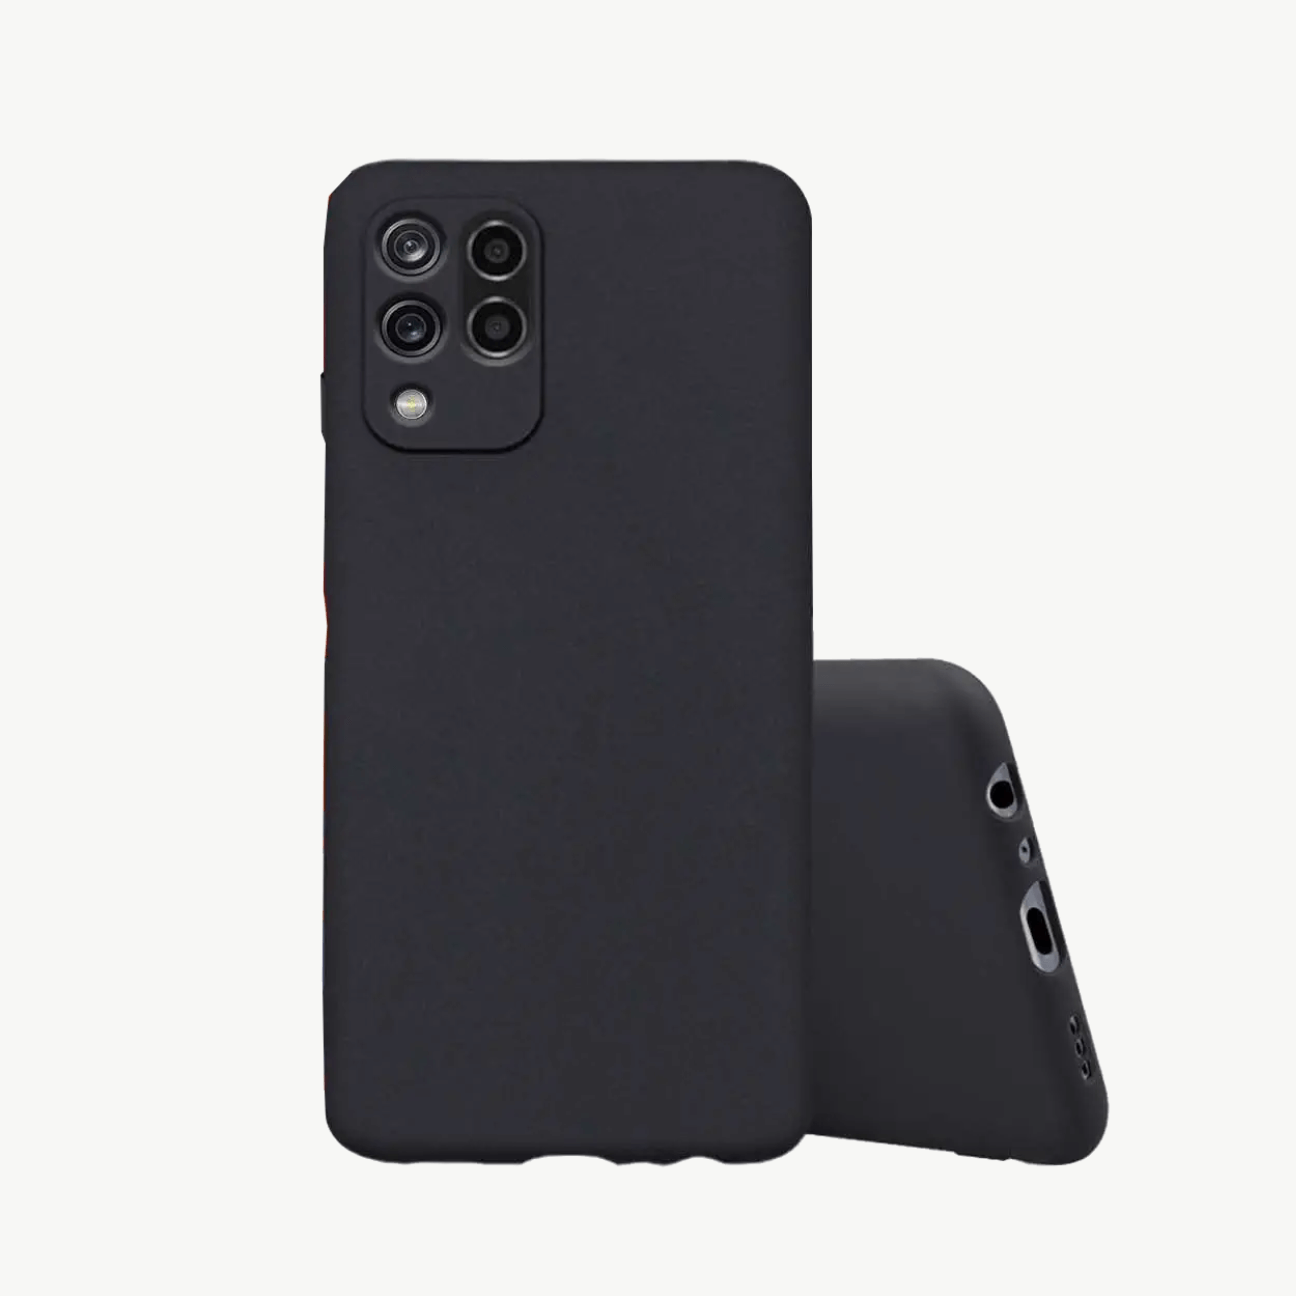 Oppo A1 Black Soft Silicone Phone Case Image